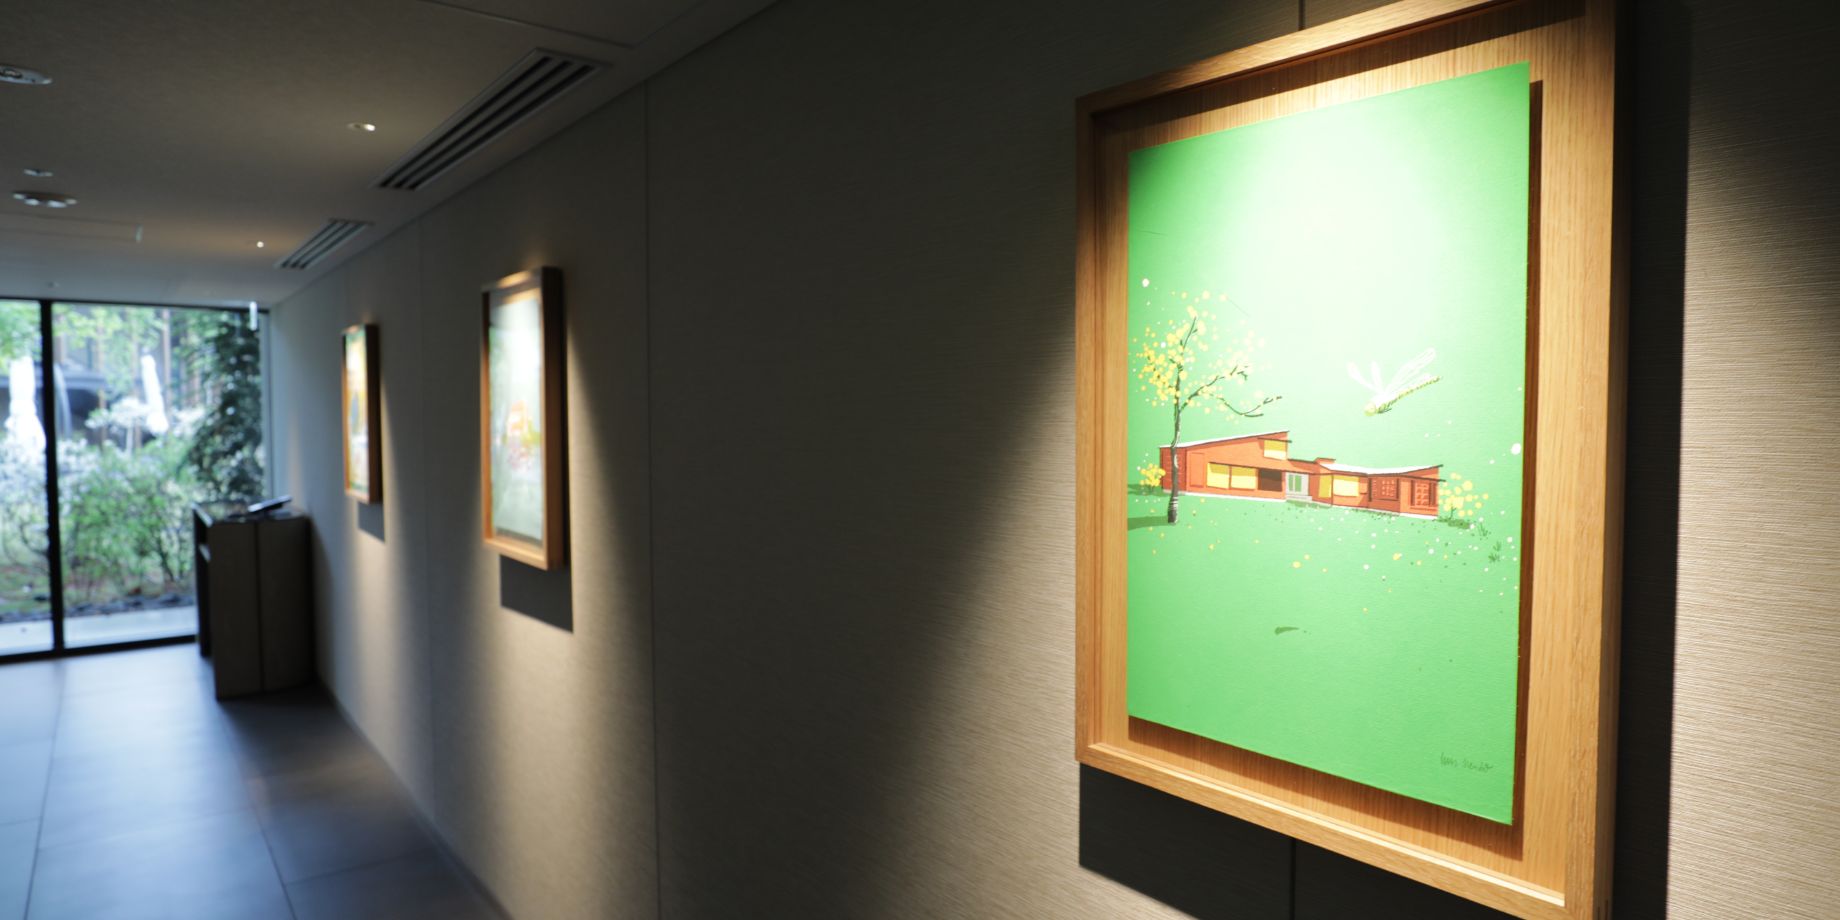 Artworks related to Karuizawa displayed in the hotel